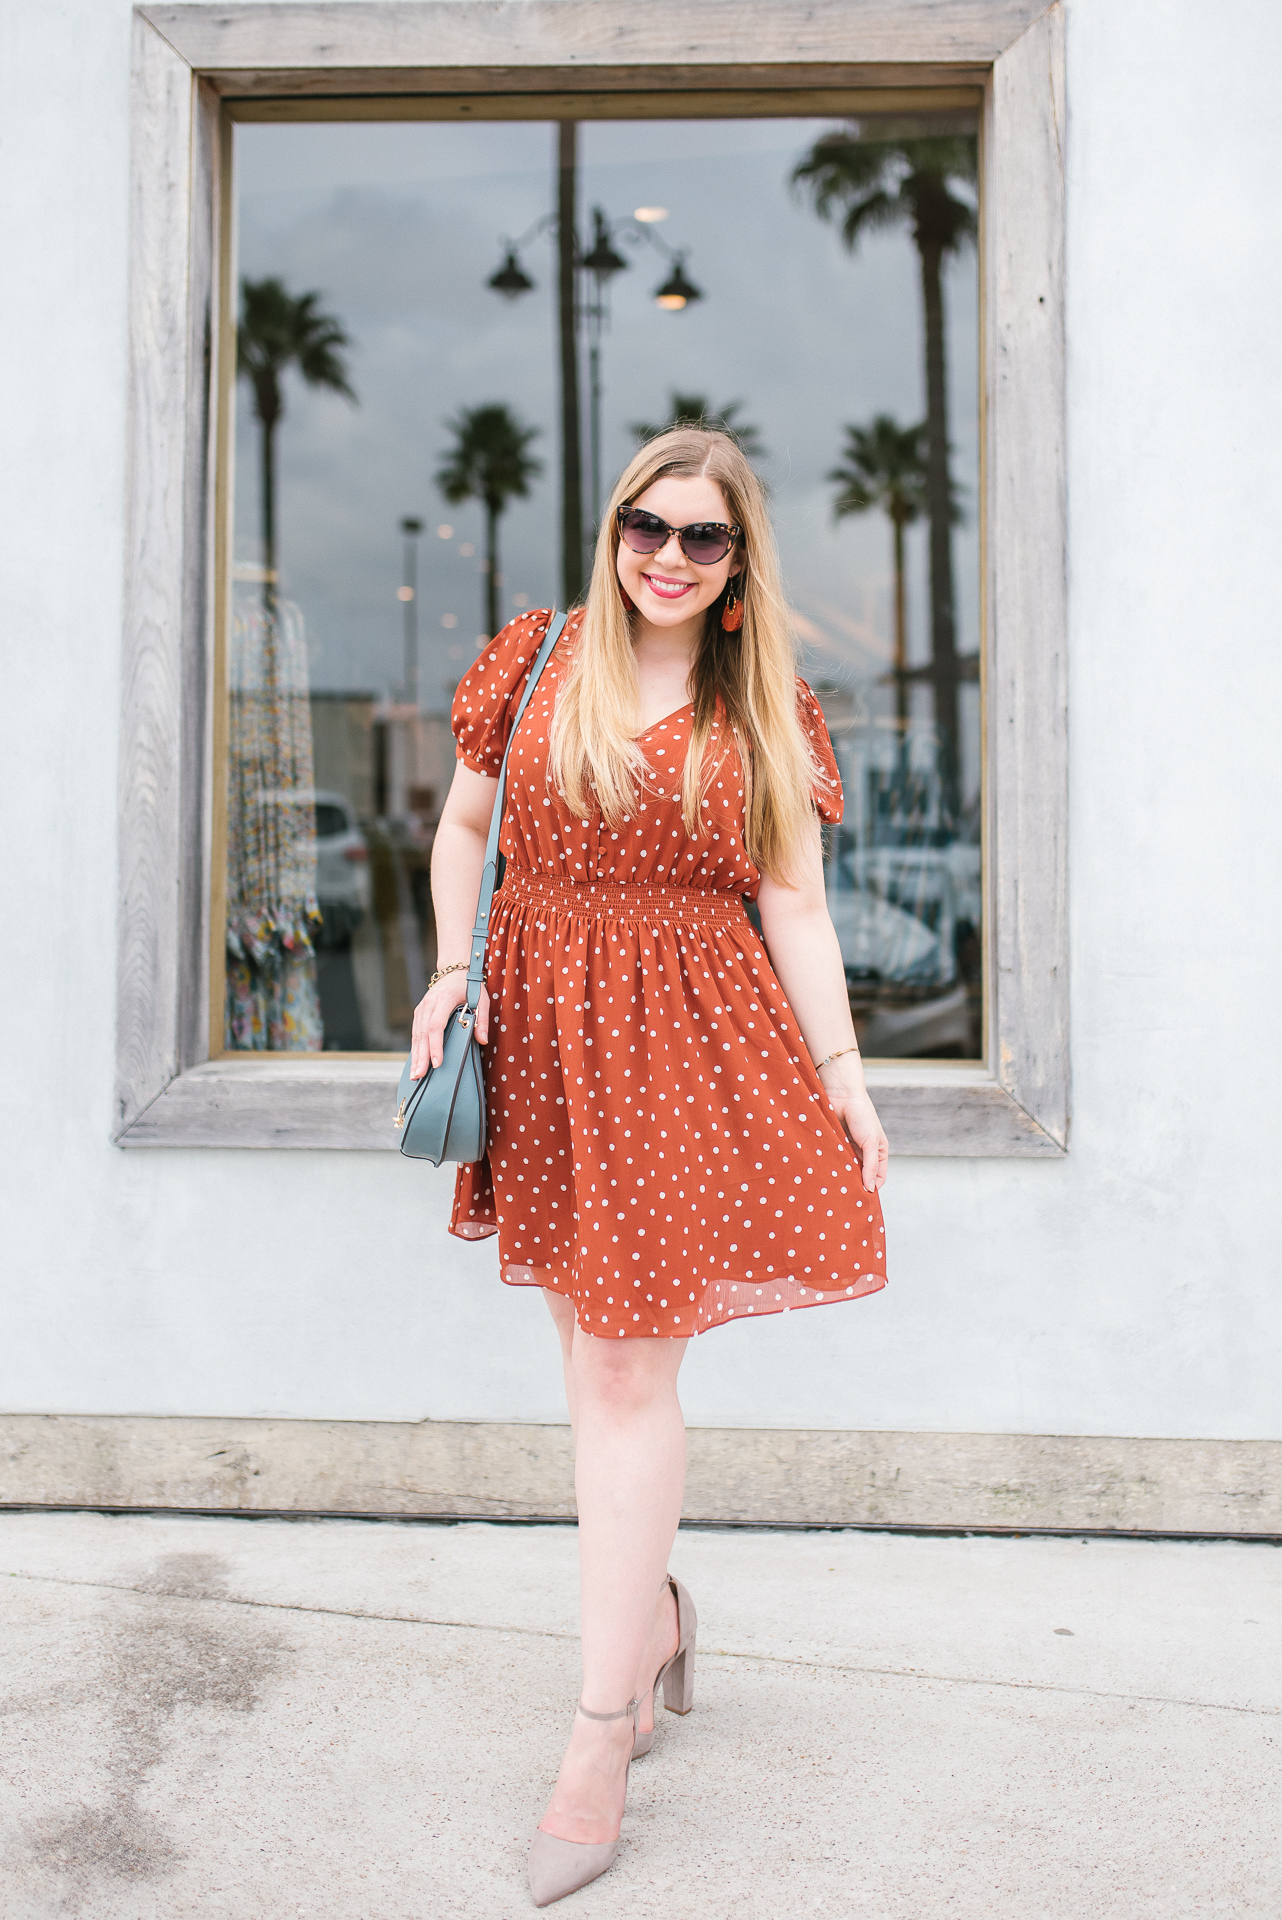 Cup of Charisma - Madewell Polka Dot Dress on Lifestyle Blogger Cup of ...